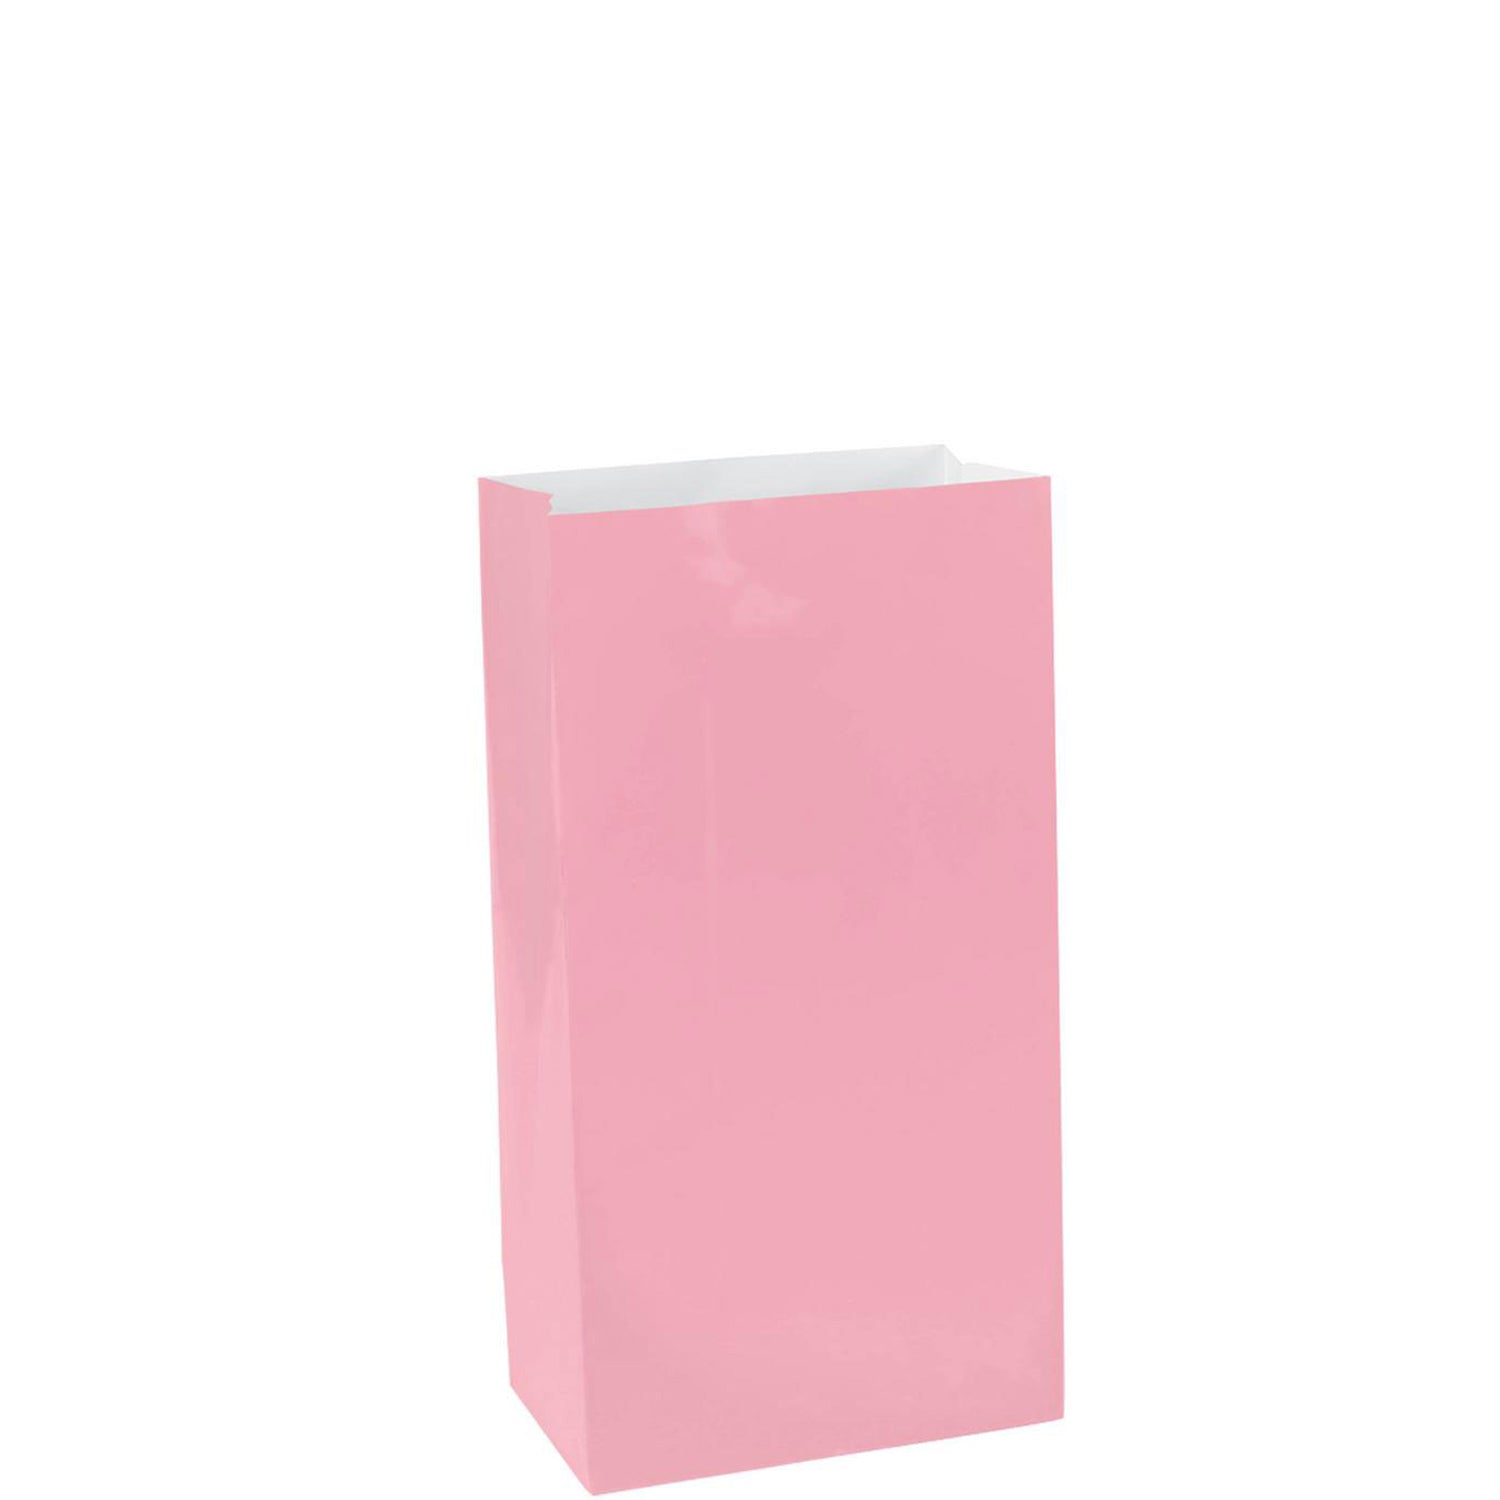 New Pink Bag Packaged Paper Bags 12pcs Favours - Party Centre